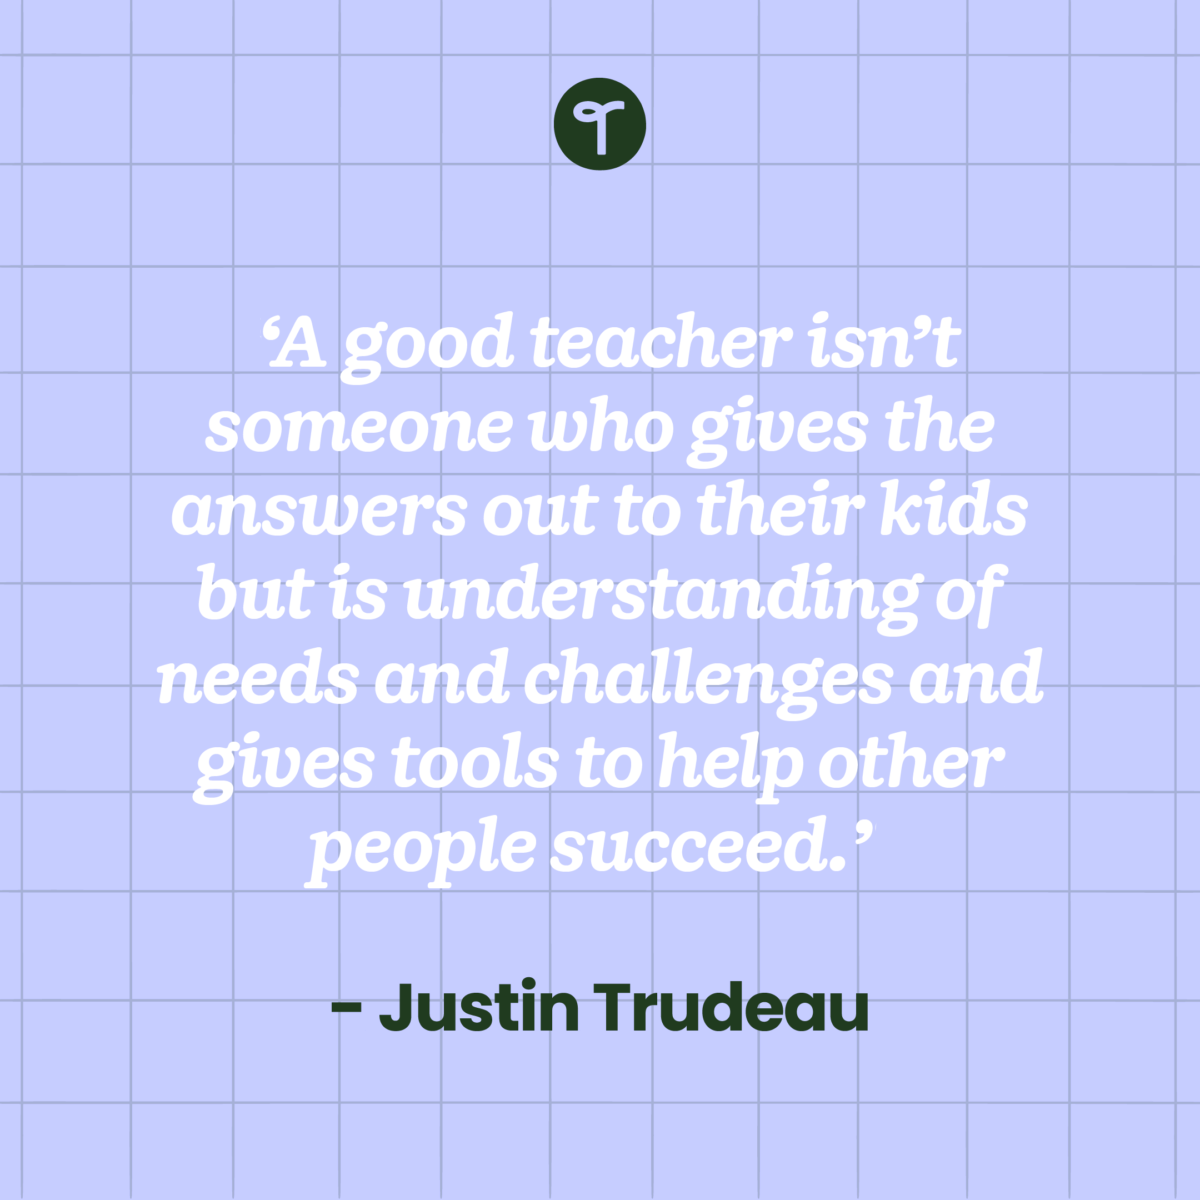  'A good teacher isn’t someone who gives the answers out to their kids but is understanding of needs and challenges and gives tools to help other people succeed.'  — Justin Trudeau written on a lavender box with green boxes